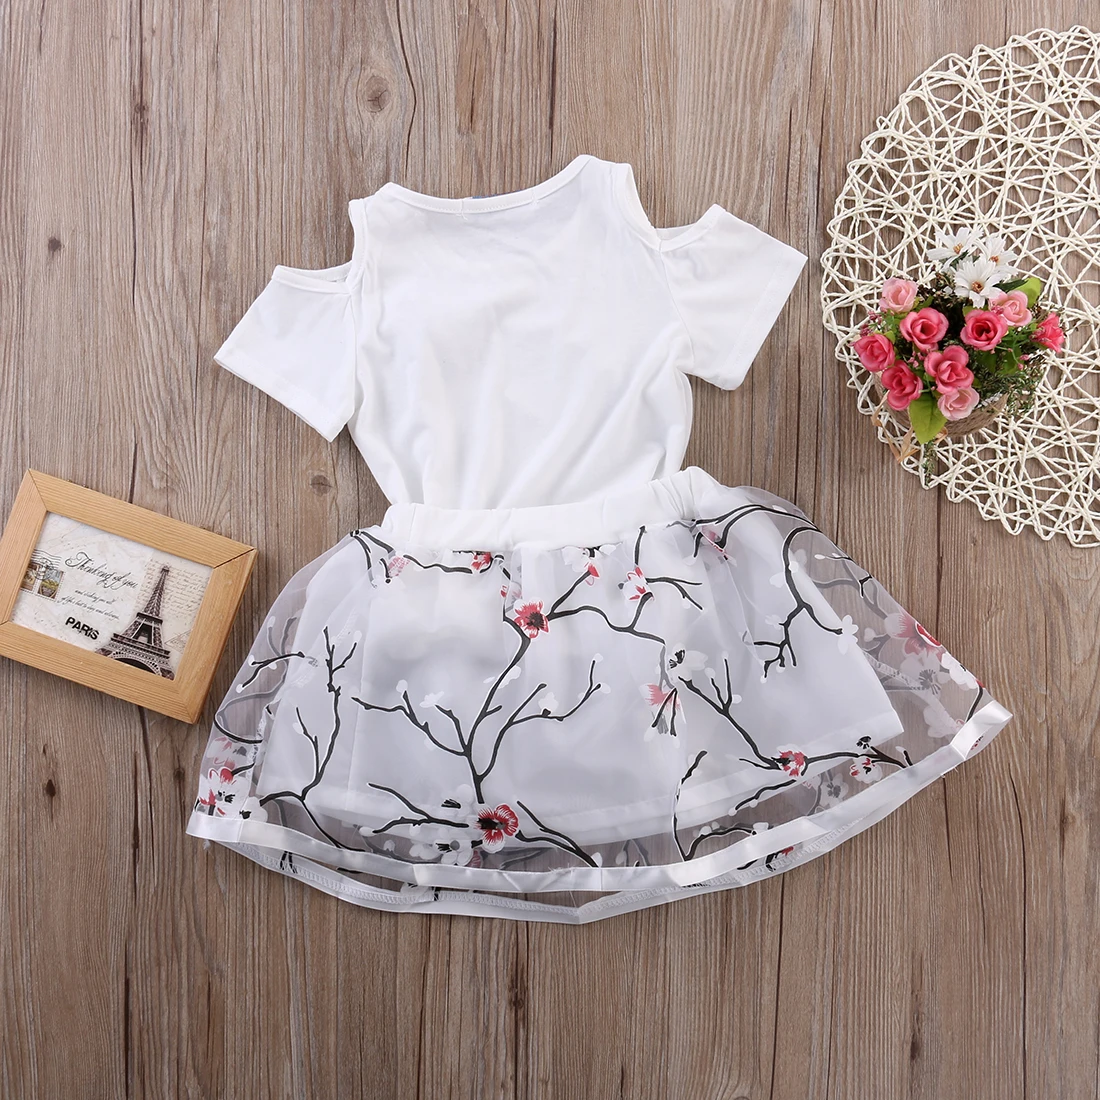 Baby-Girls-Clothes-2016-New-Arrival-Baby-Girls-Dress-Summer-Short-Sleeve-T-Shirt-Top-Hole-Floral-Skirt-2PCS-Outfit-Child-Dress-3